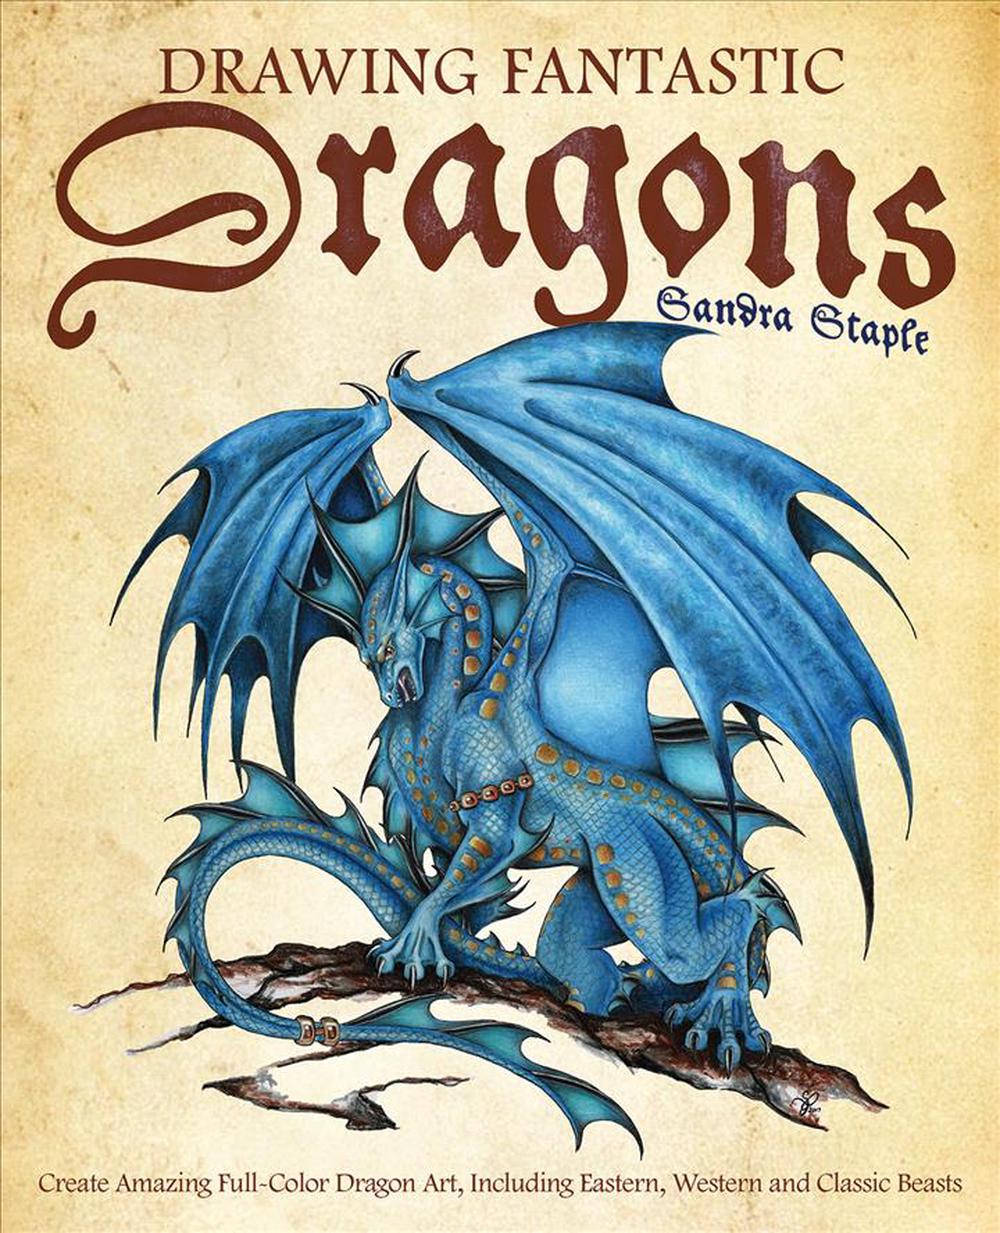 Drawing Fantastic Dragons by Sandra Staple Paperback Book Free Shipping